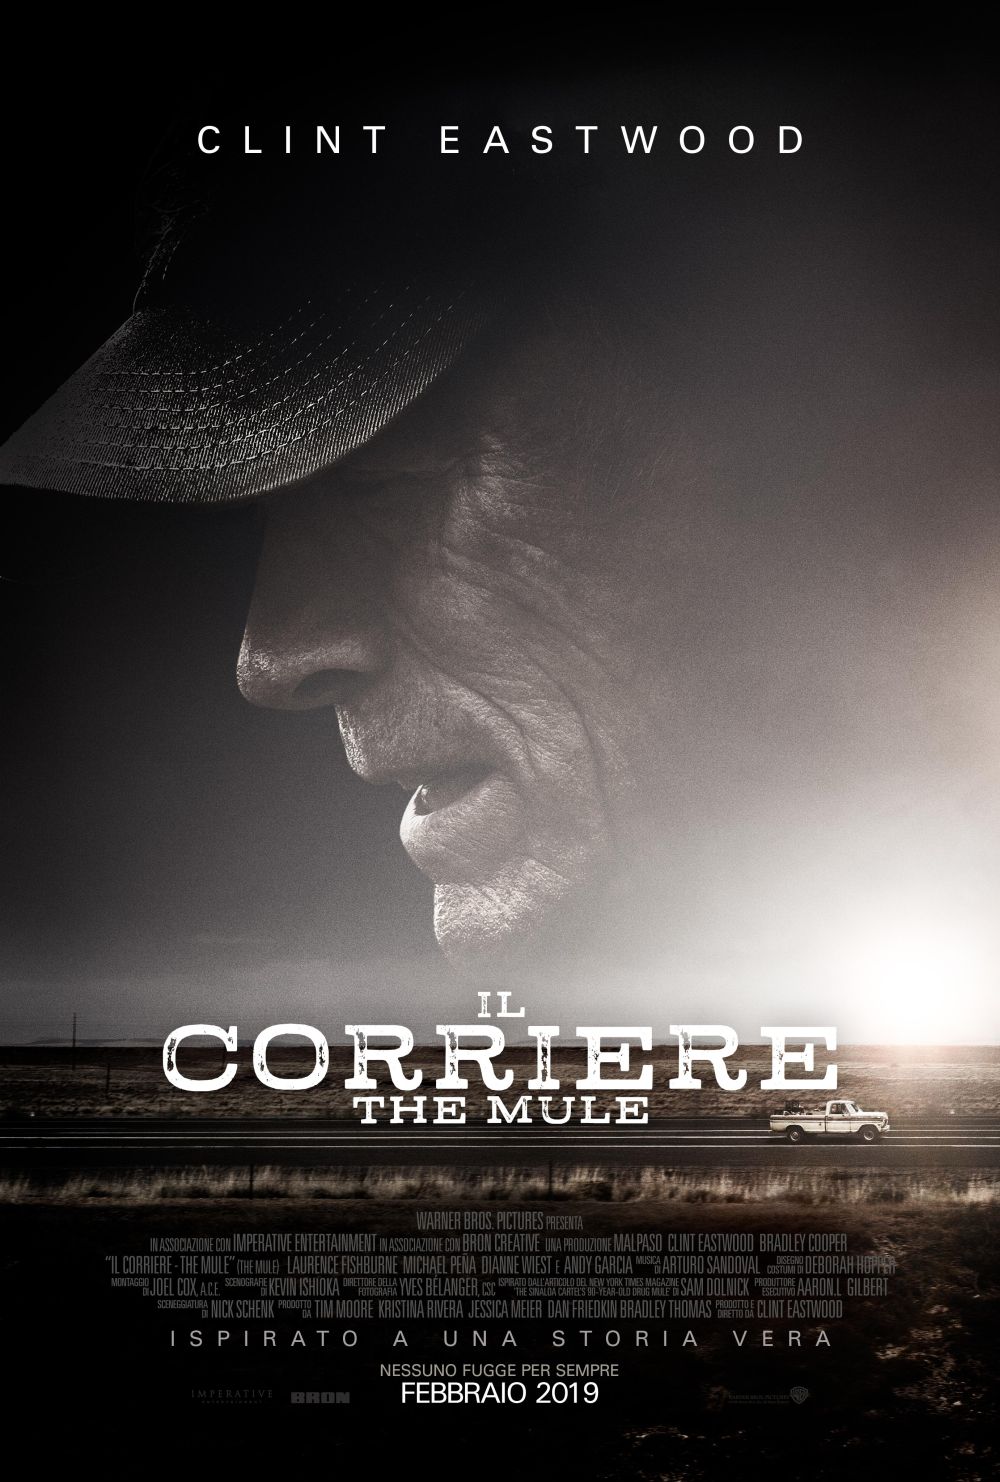 https://movieplayer.it/film/il-corriere-the-mule_49015/